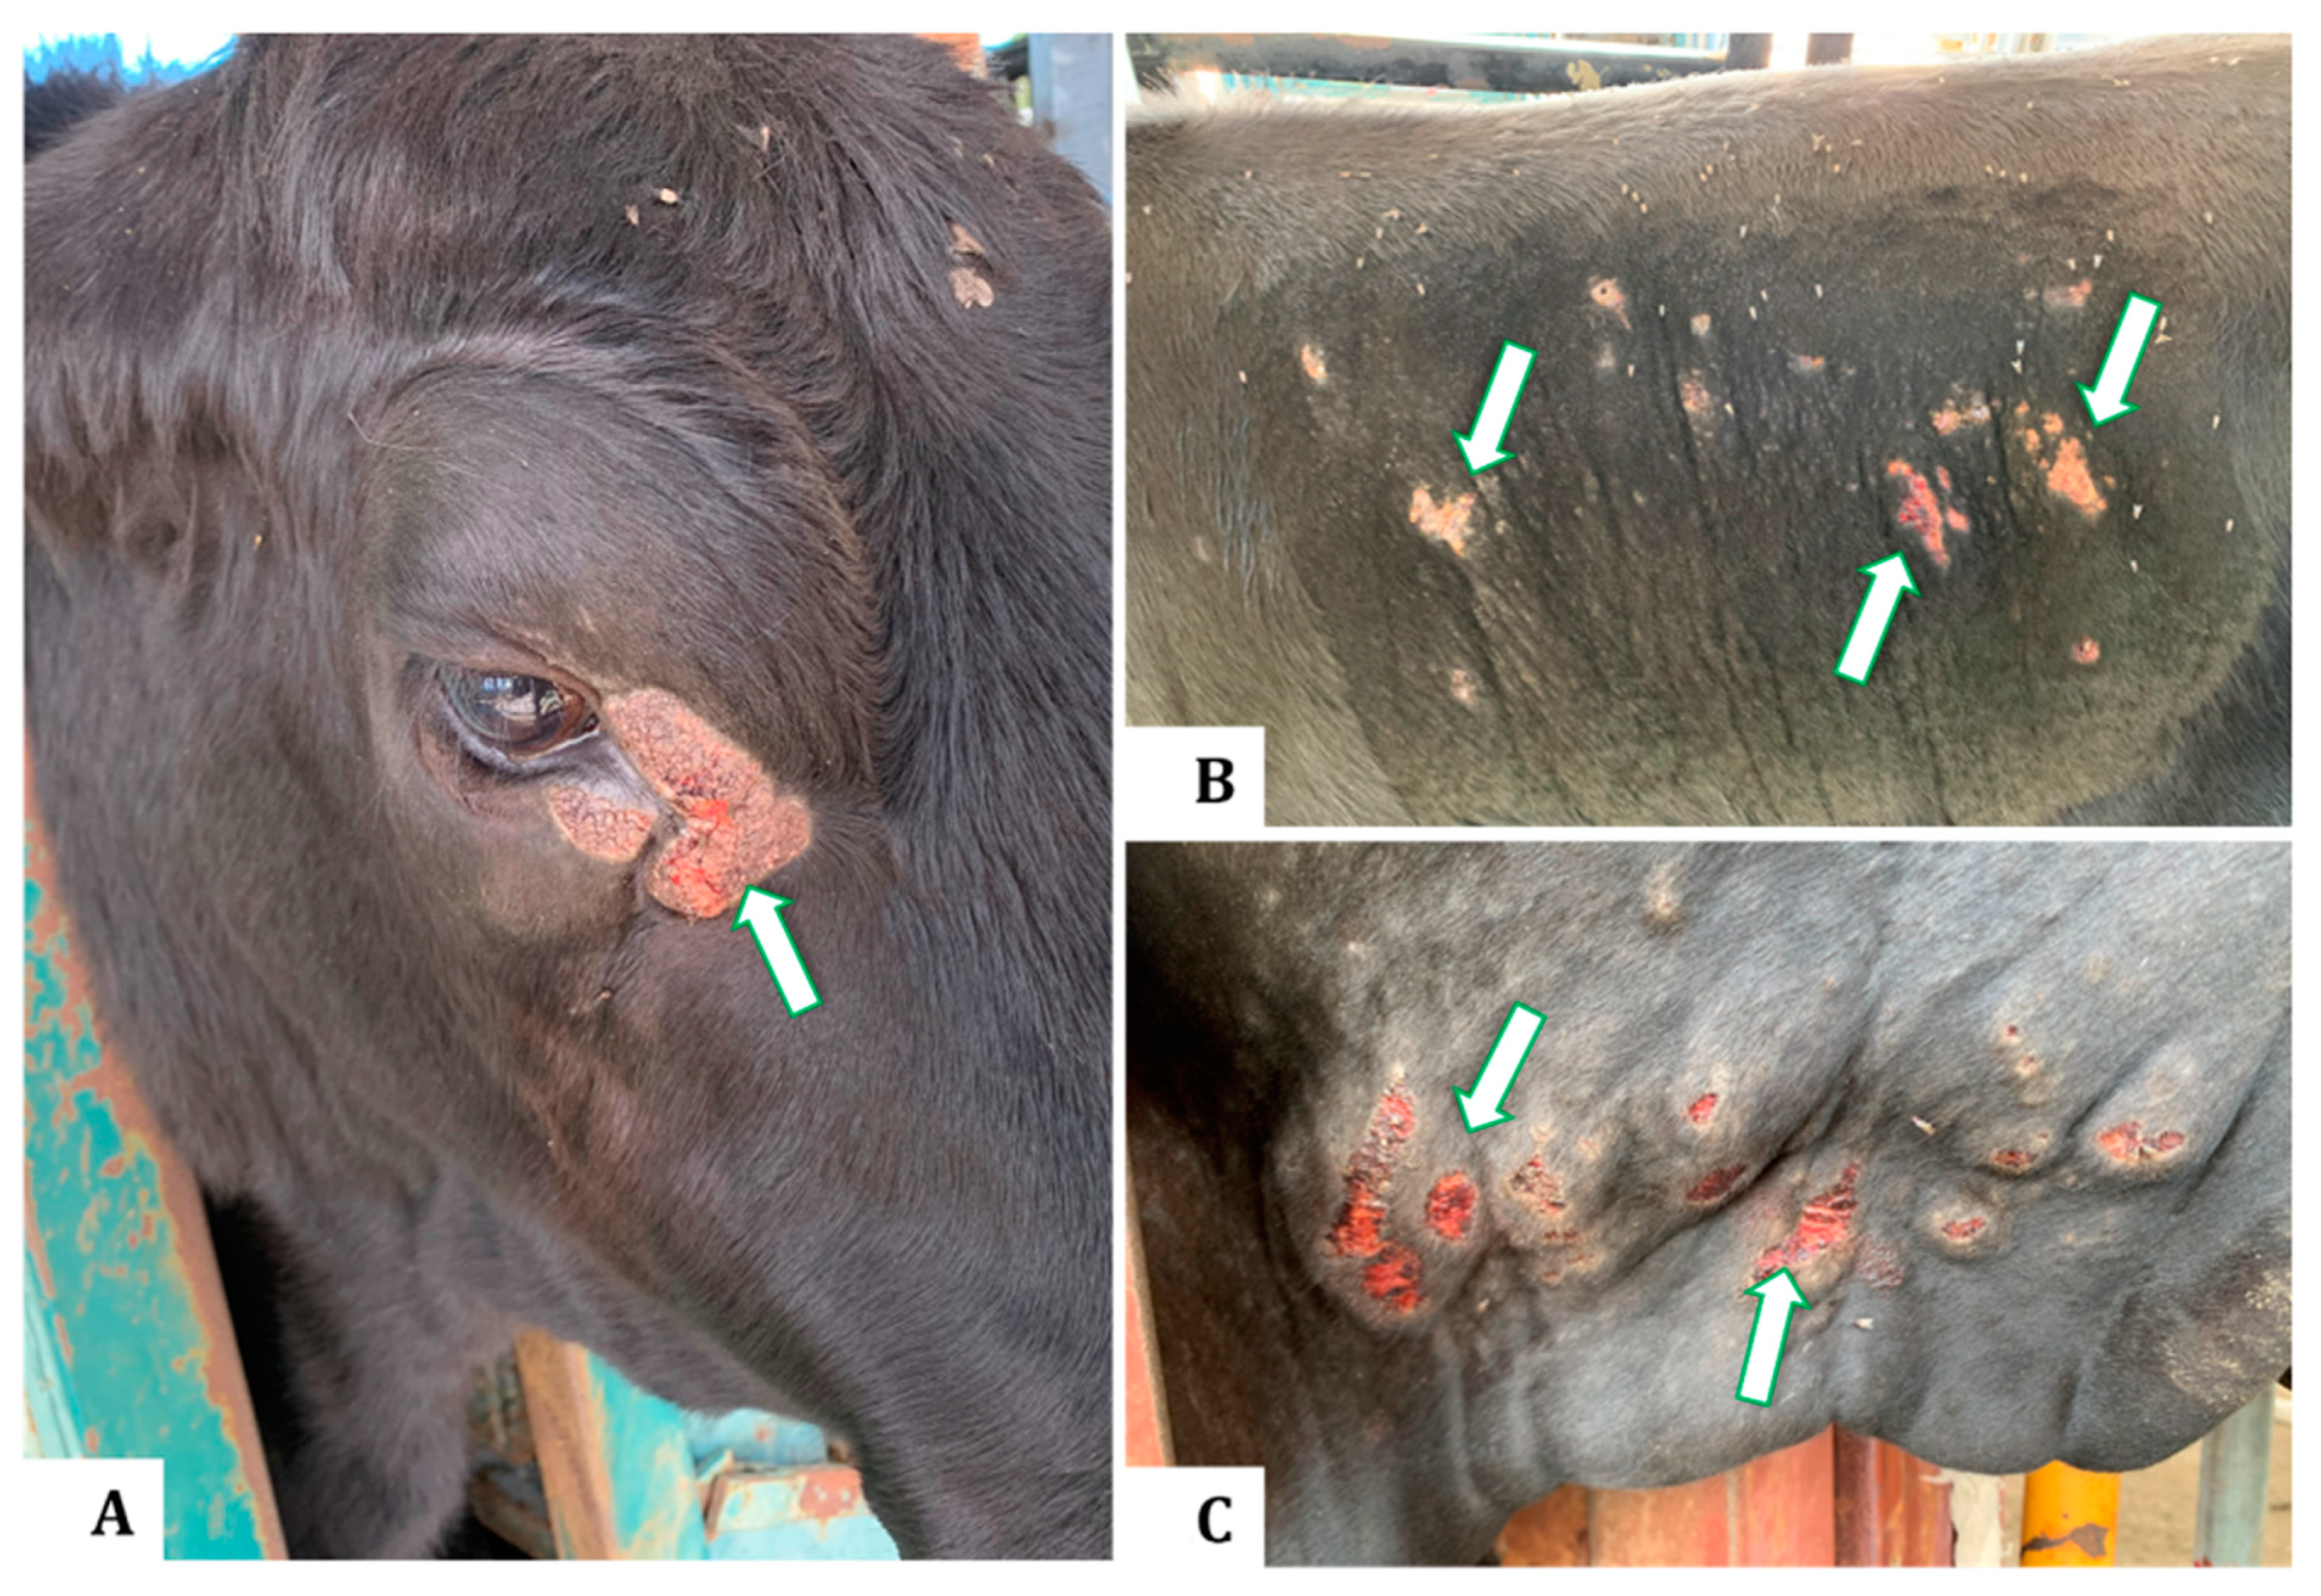 Animals | Free Full-Text | The Development of Cutaneous Lesions in  Tropically Adapted Beef Cattle Is Associated with Hypersensitive Immune  Response to Buffalo Fly Antigens